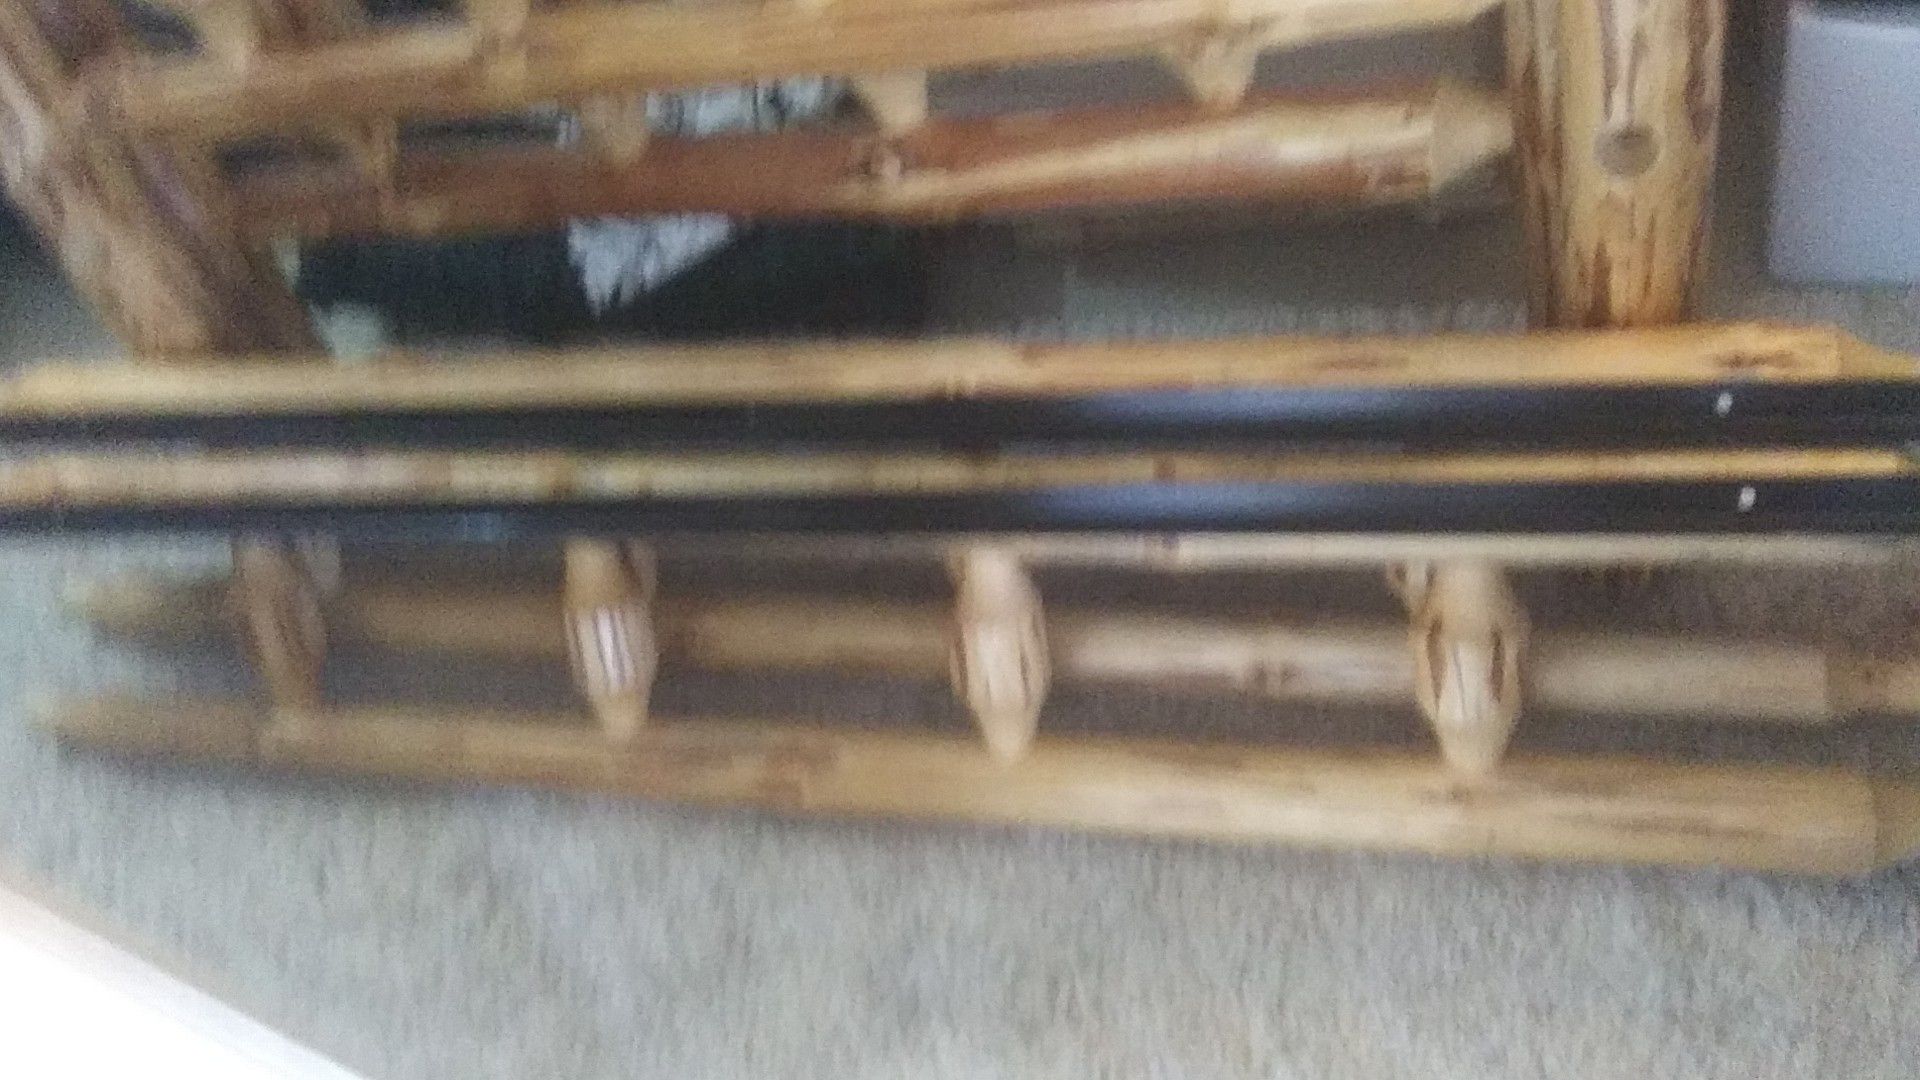 Log wood bed frame queen size must pick up today